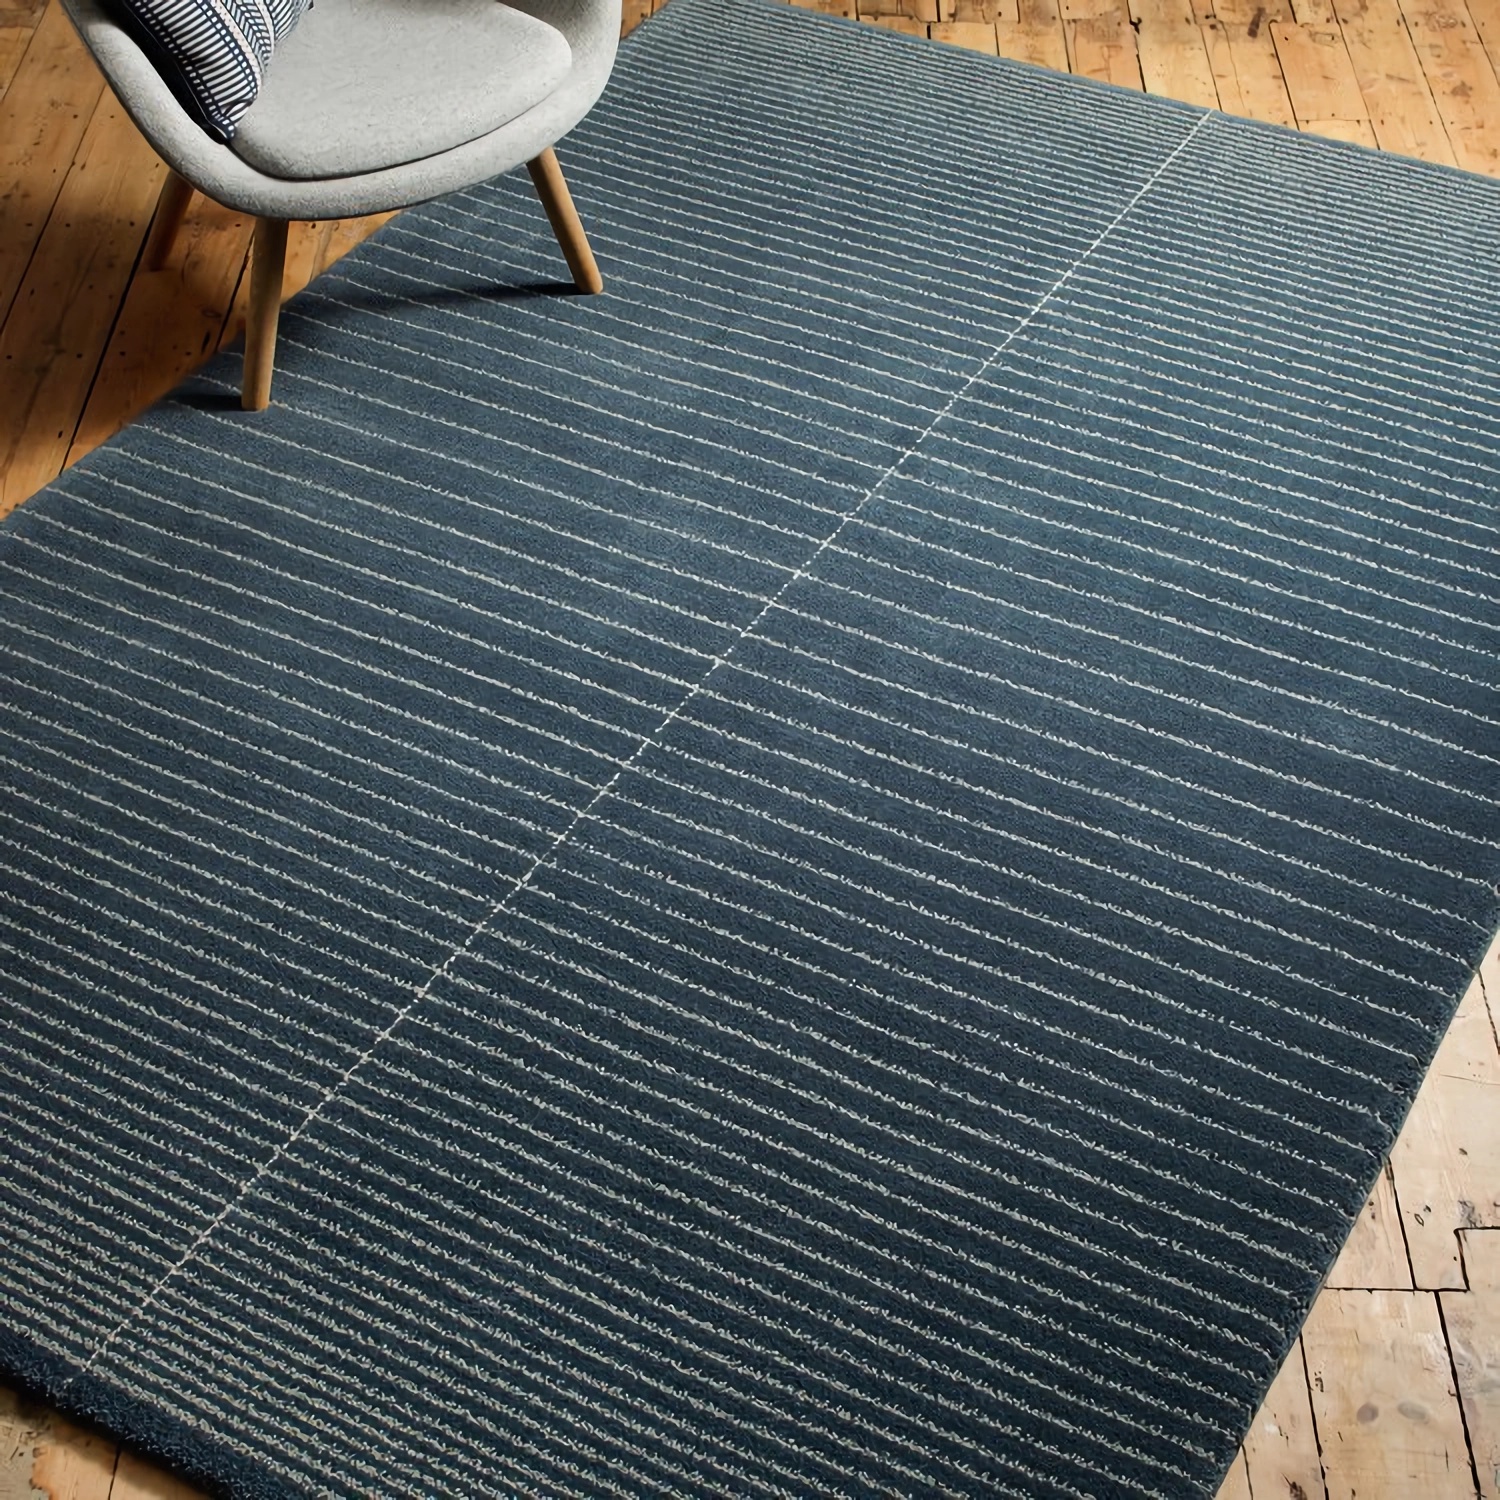 Overton Airforce rug by Roger Oates